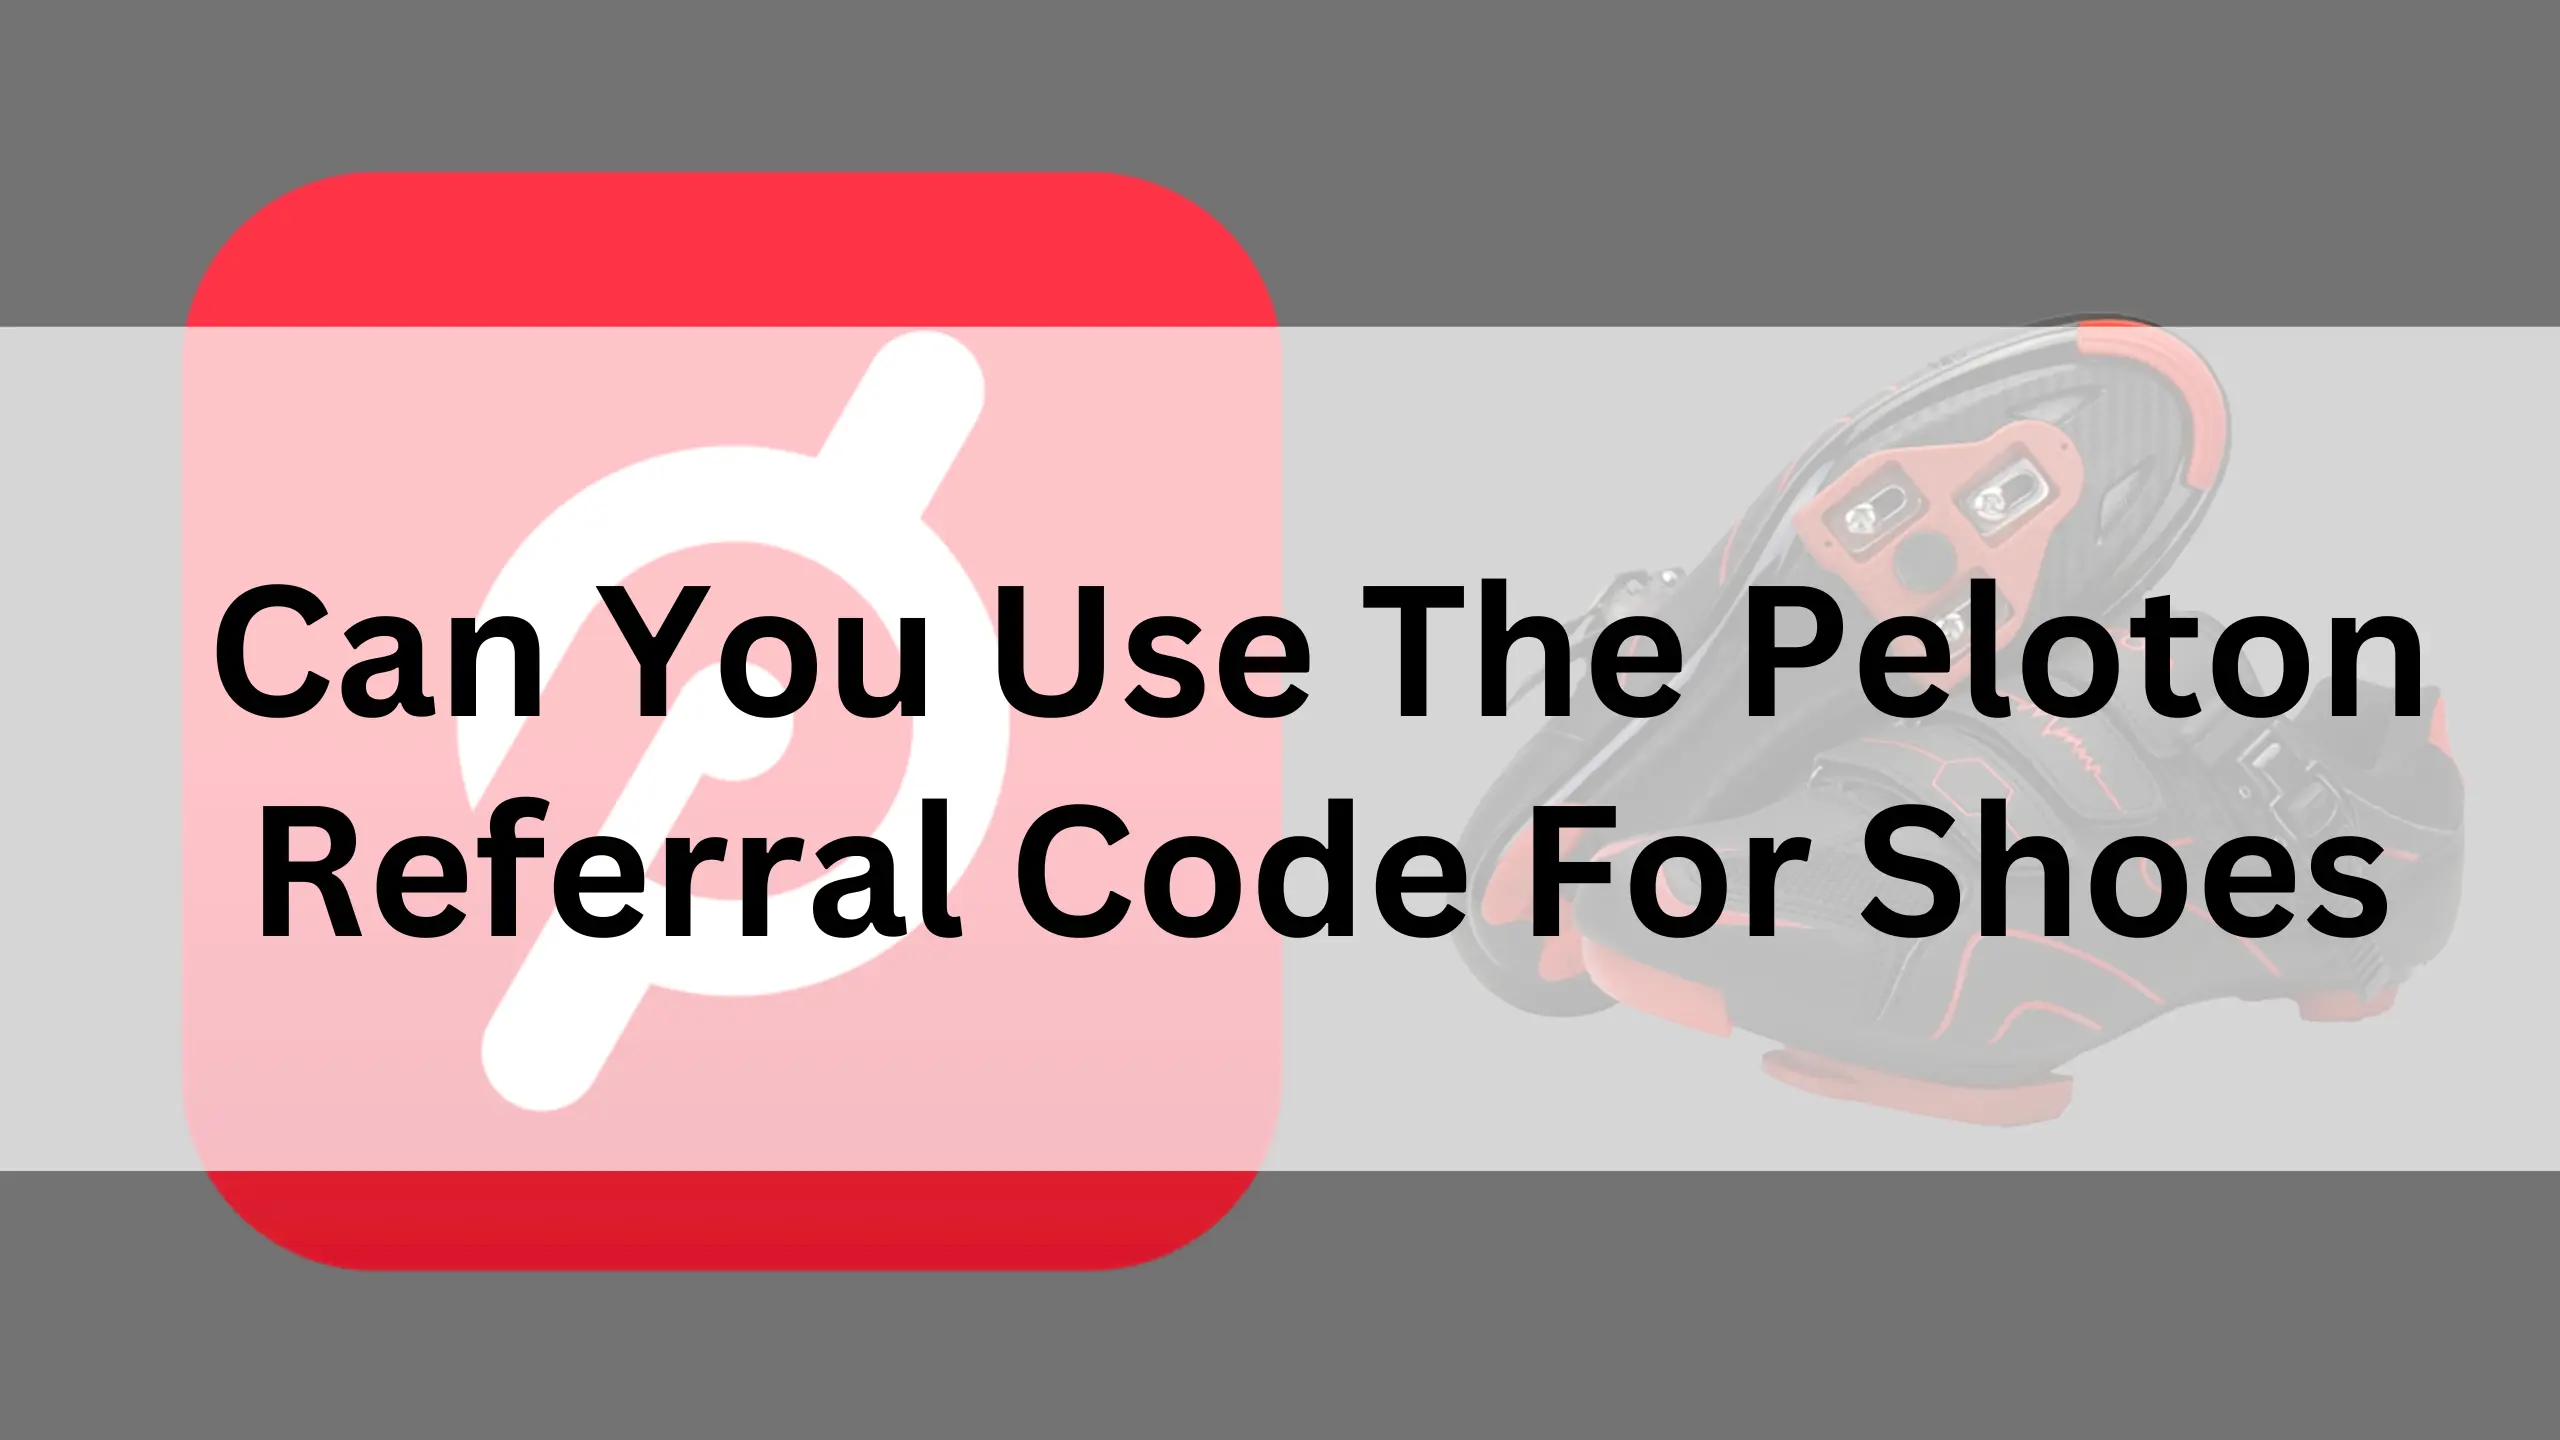 Can You Use The Peloton Referral Code For Shoes